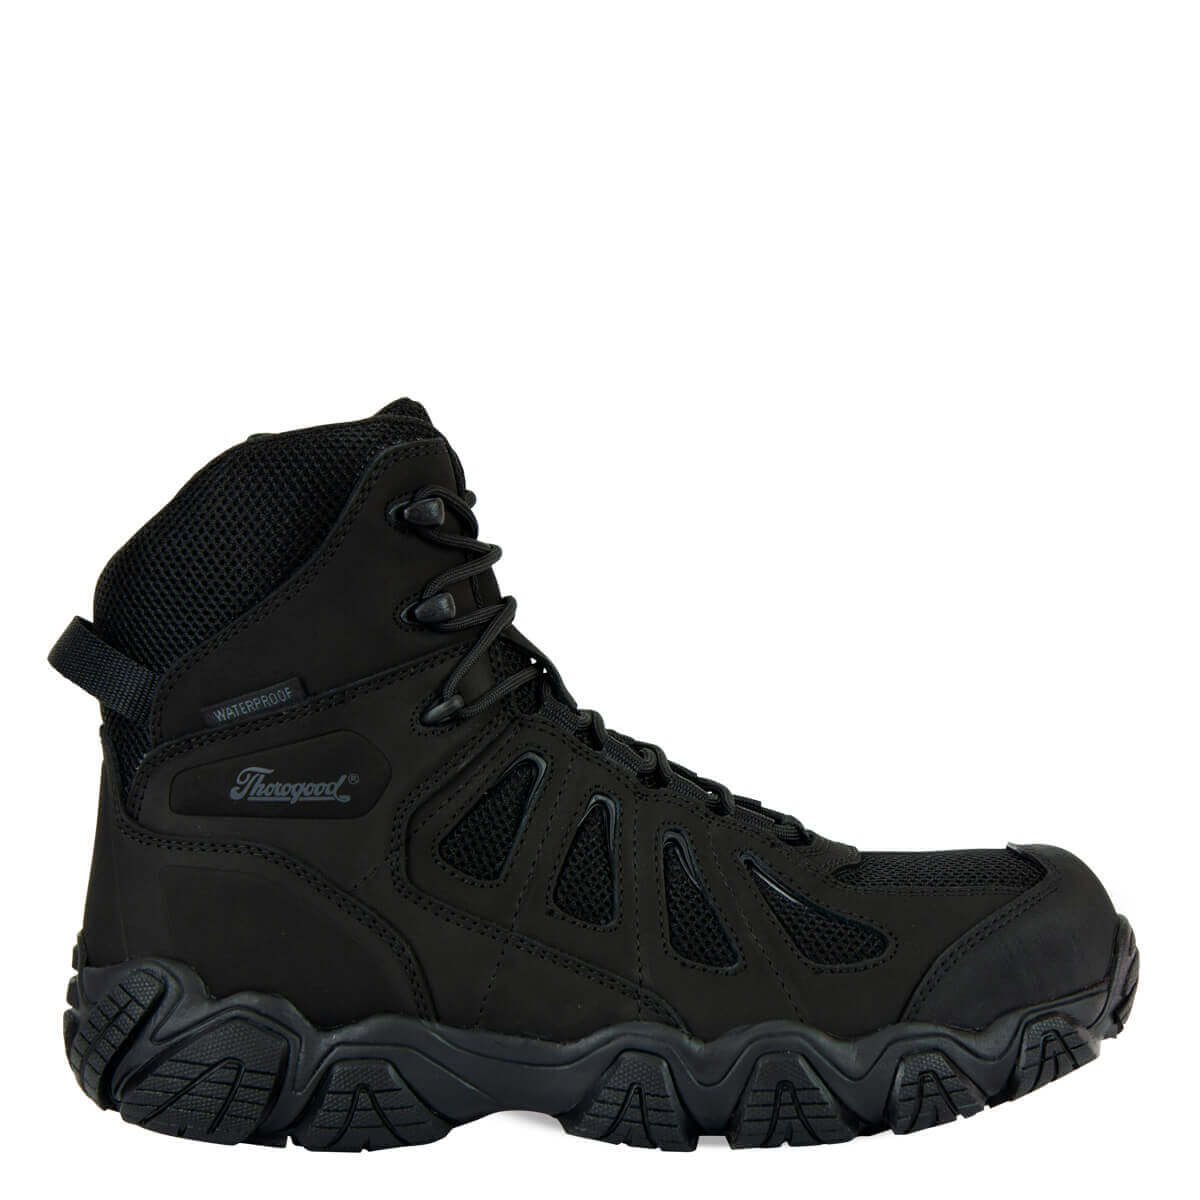 Thorogood Crosstrex Series Safety Toe Side Zip BBP Waterproof 6 Inch Hiker Boots from Columbia Safety